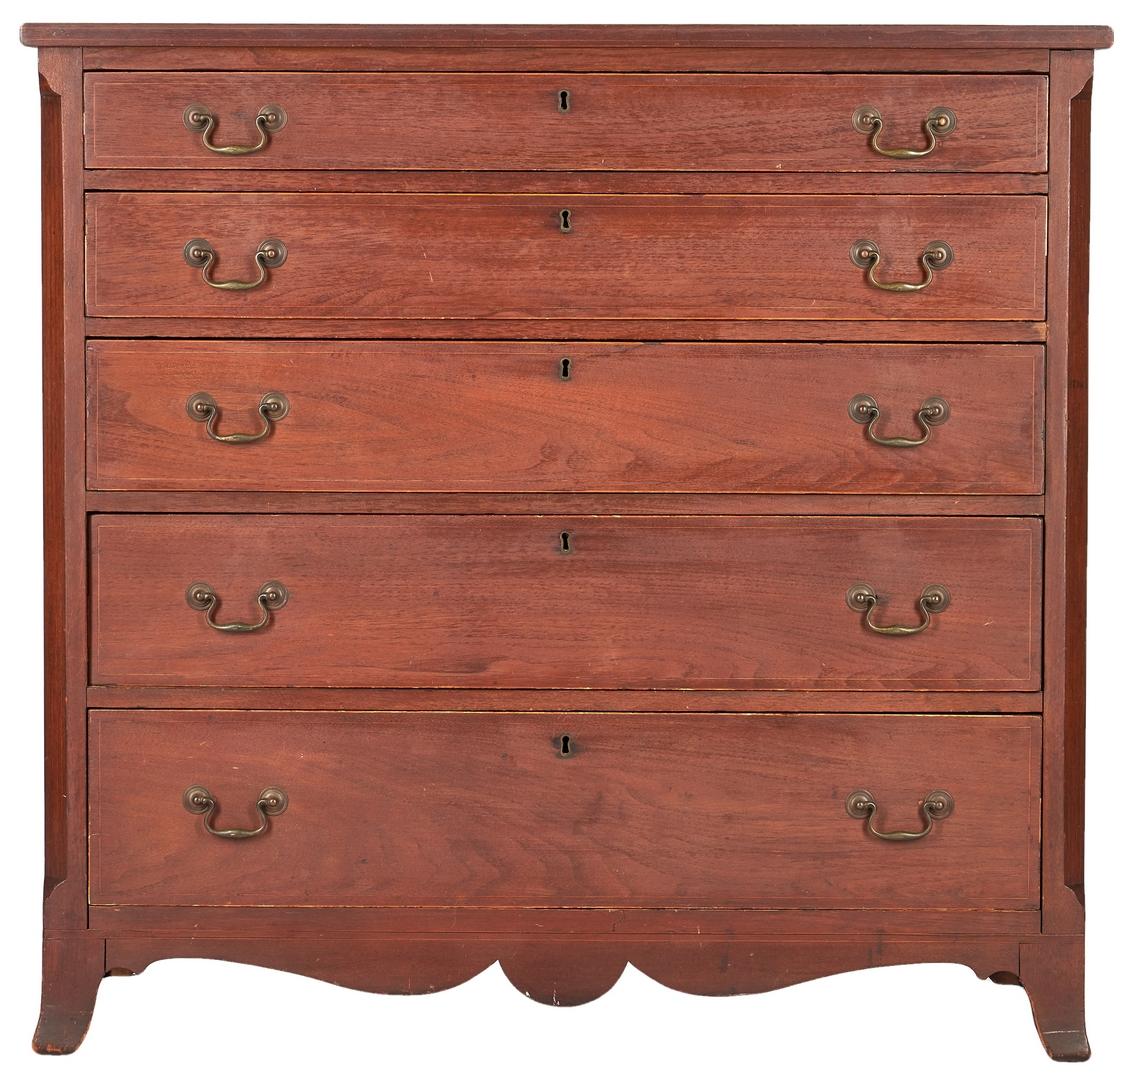 Federal Inlaid Hepplewhite Chest of Drawers